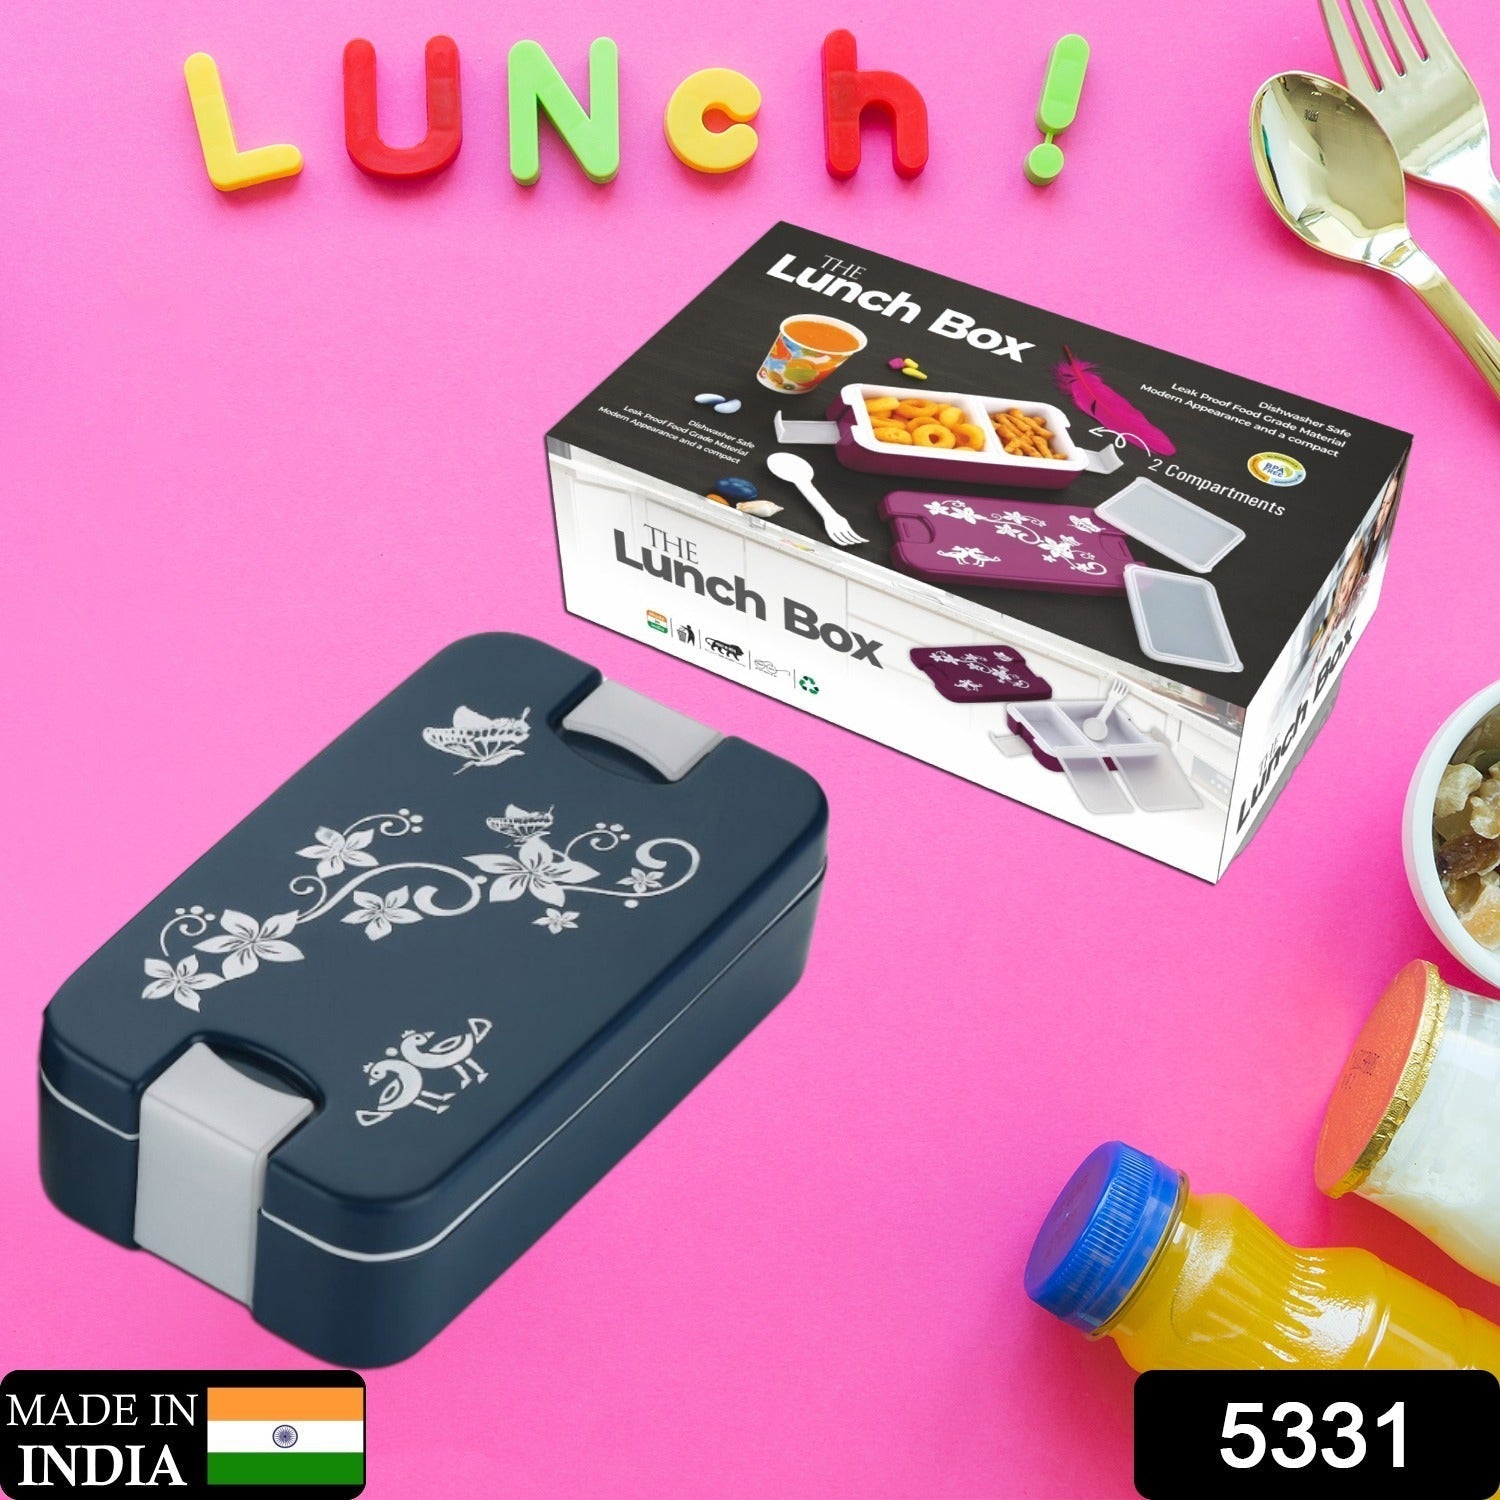 5331 Airtight Lunch Box 2 Compartment Lunch Box Leak Proof Food Grade Material Lunch Box Modern Appearance & Compact Lunch Box With Spoon DeoDap